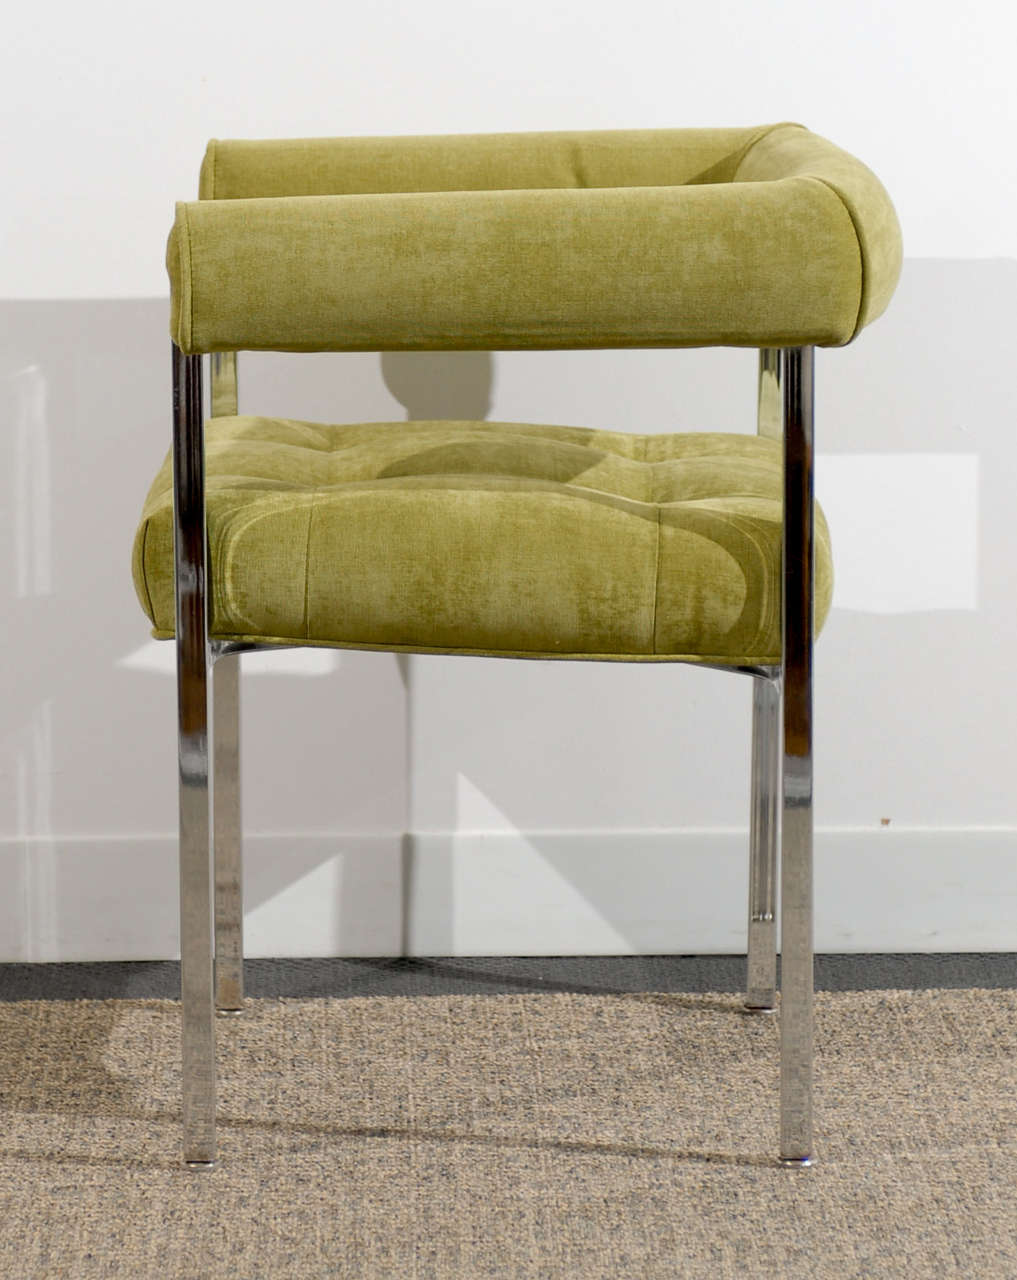 American Beautiful Milo Baughman Style Chrome Armchairs in Lime Chenille For Sale